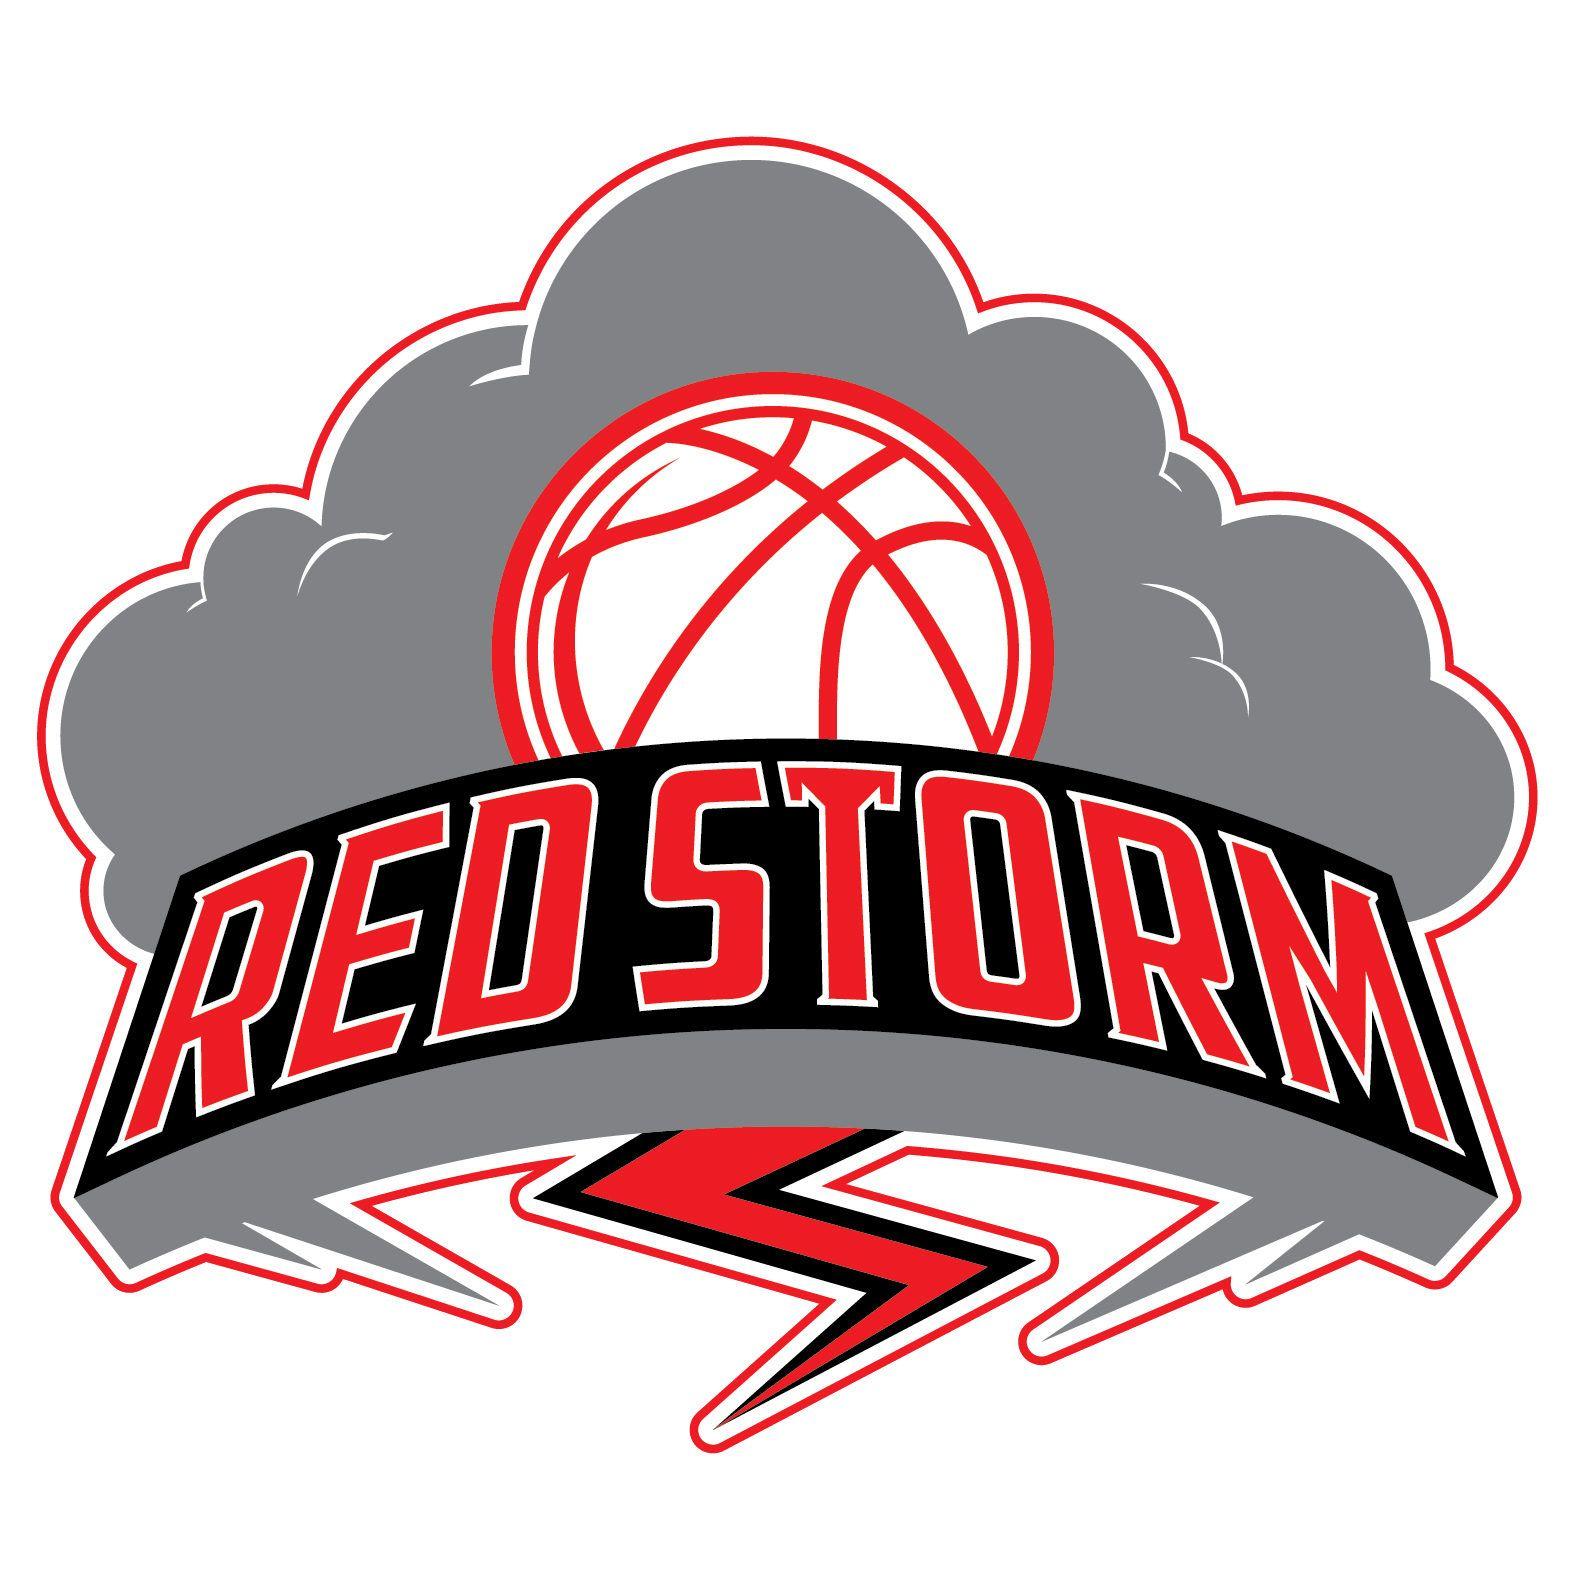 Red Storm Logo - GA Red Storm – The Storm Is Coming!